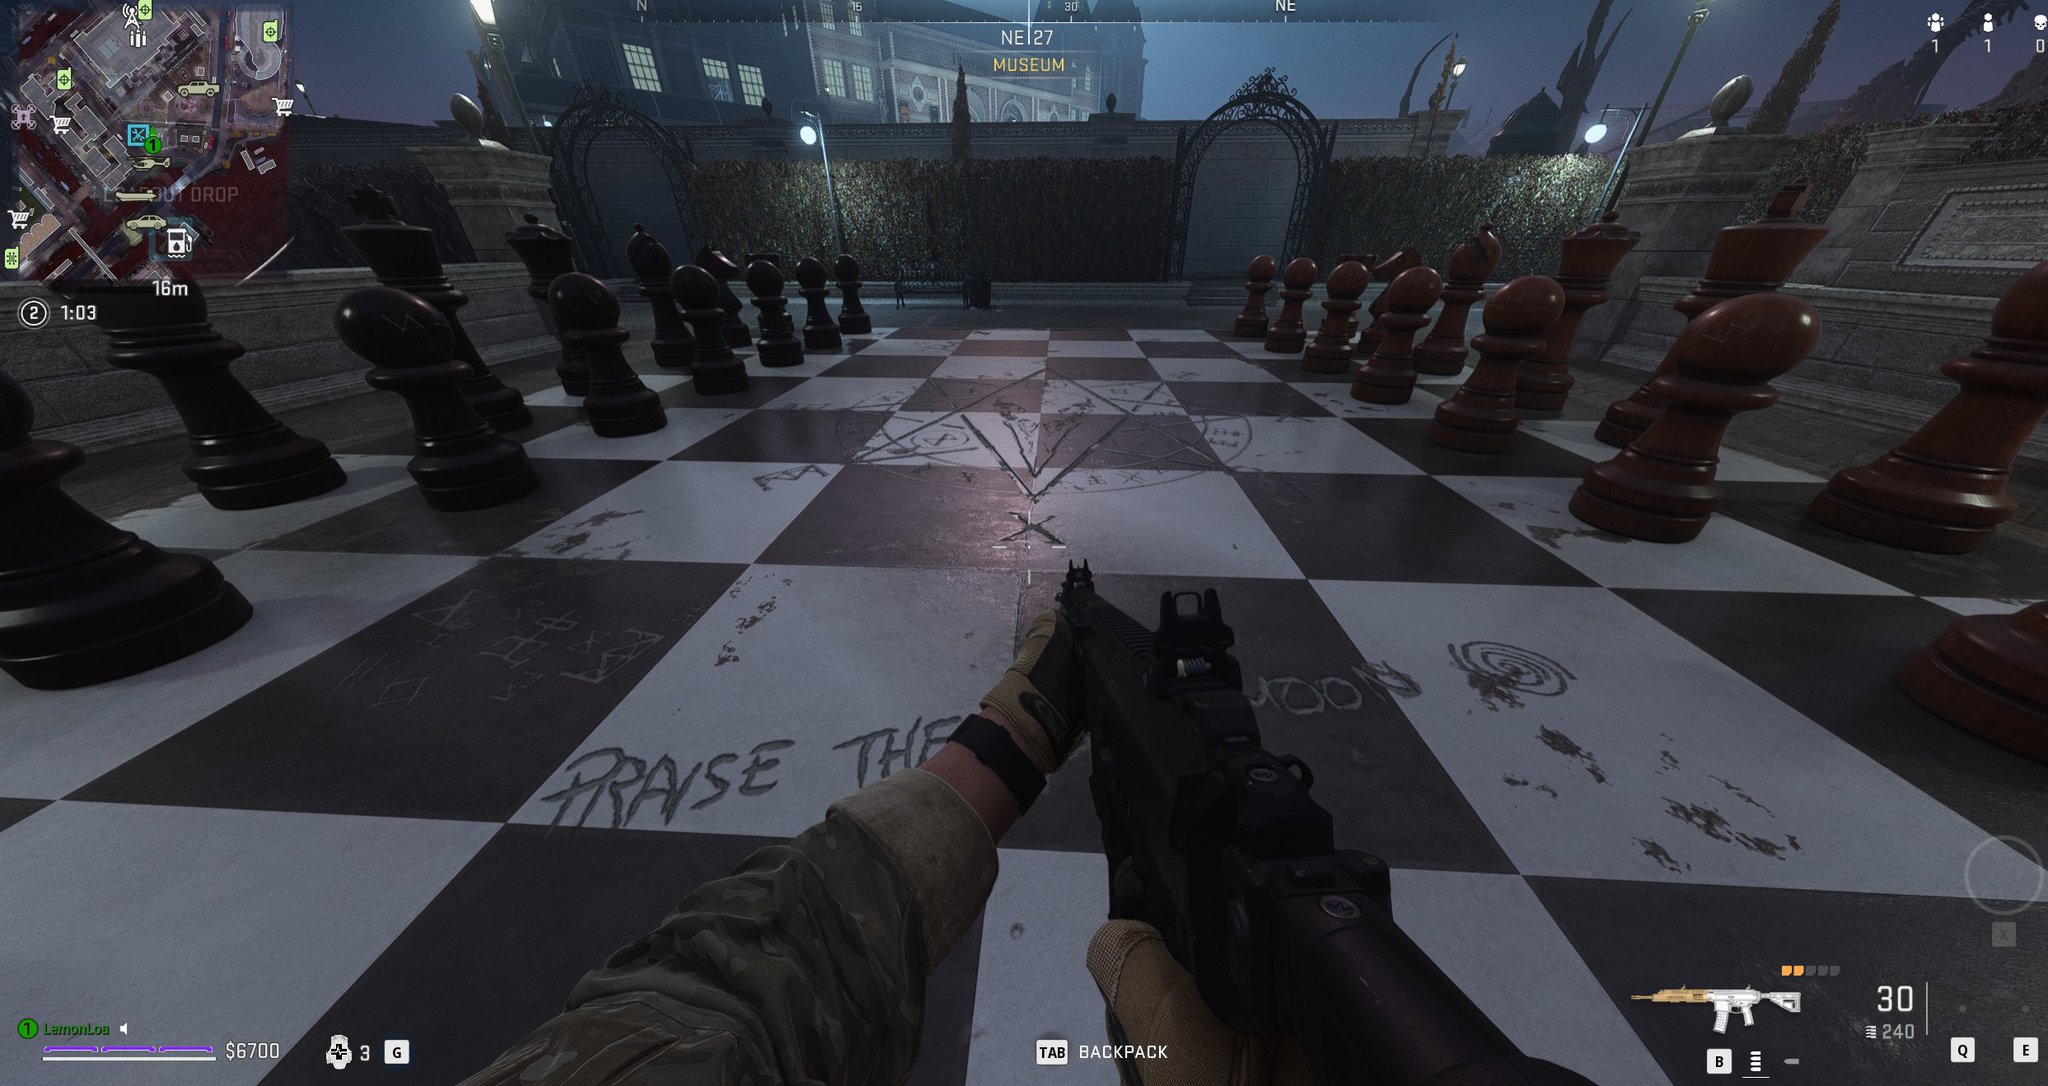 How to complete the Chess Board Easter Egg in Warzone 2's Vondead